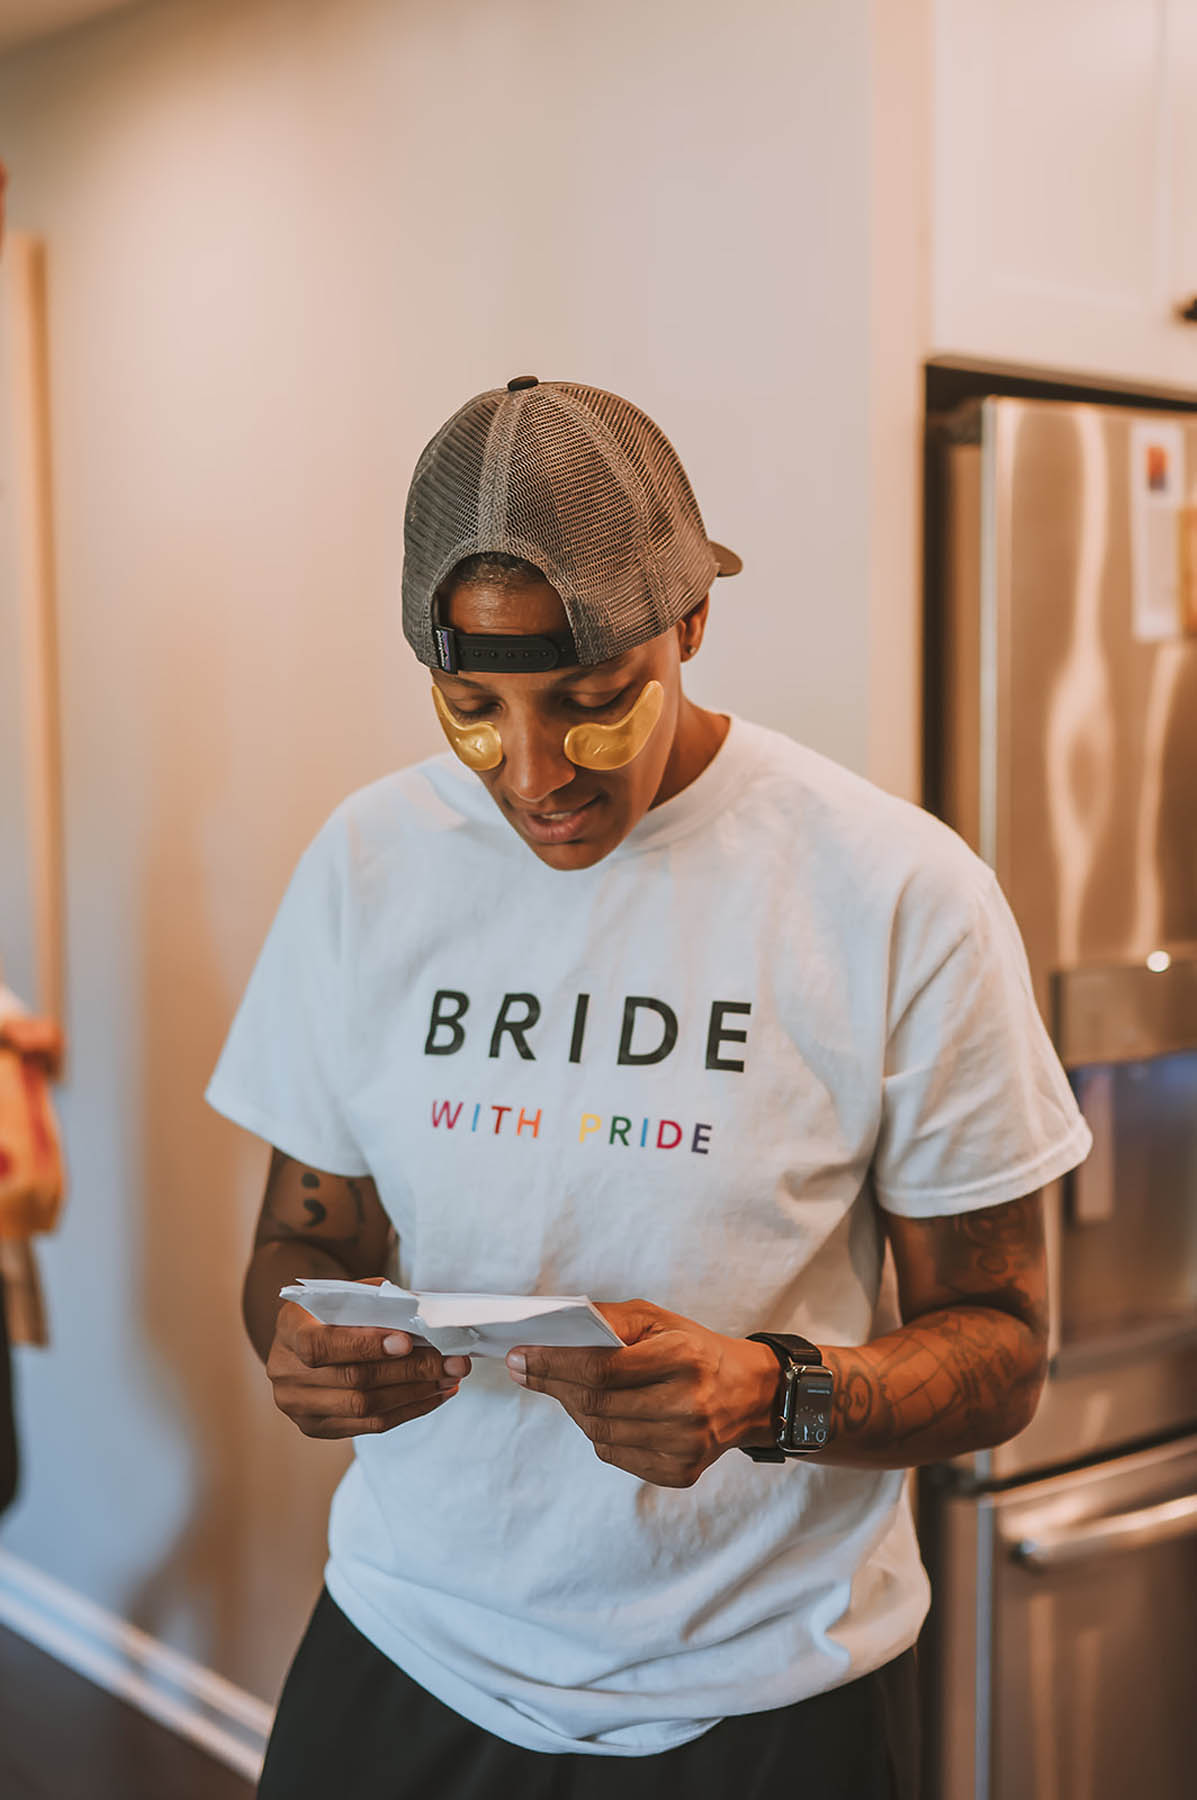 One of the marriers wears a backwards baseball cap and a t-shirt reading "Bride with pride" as she reads a letter from her spouse-to-be.